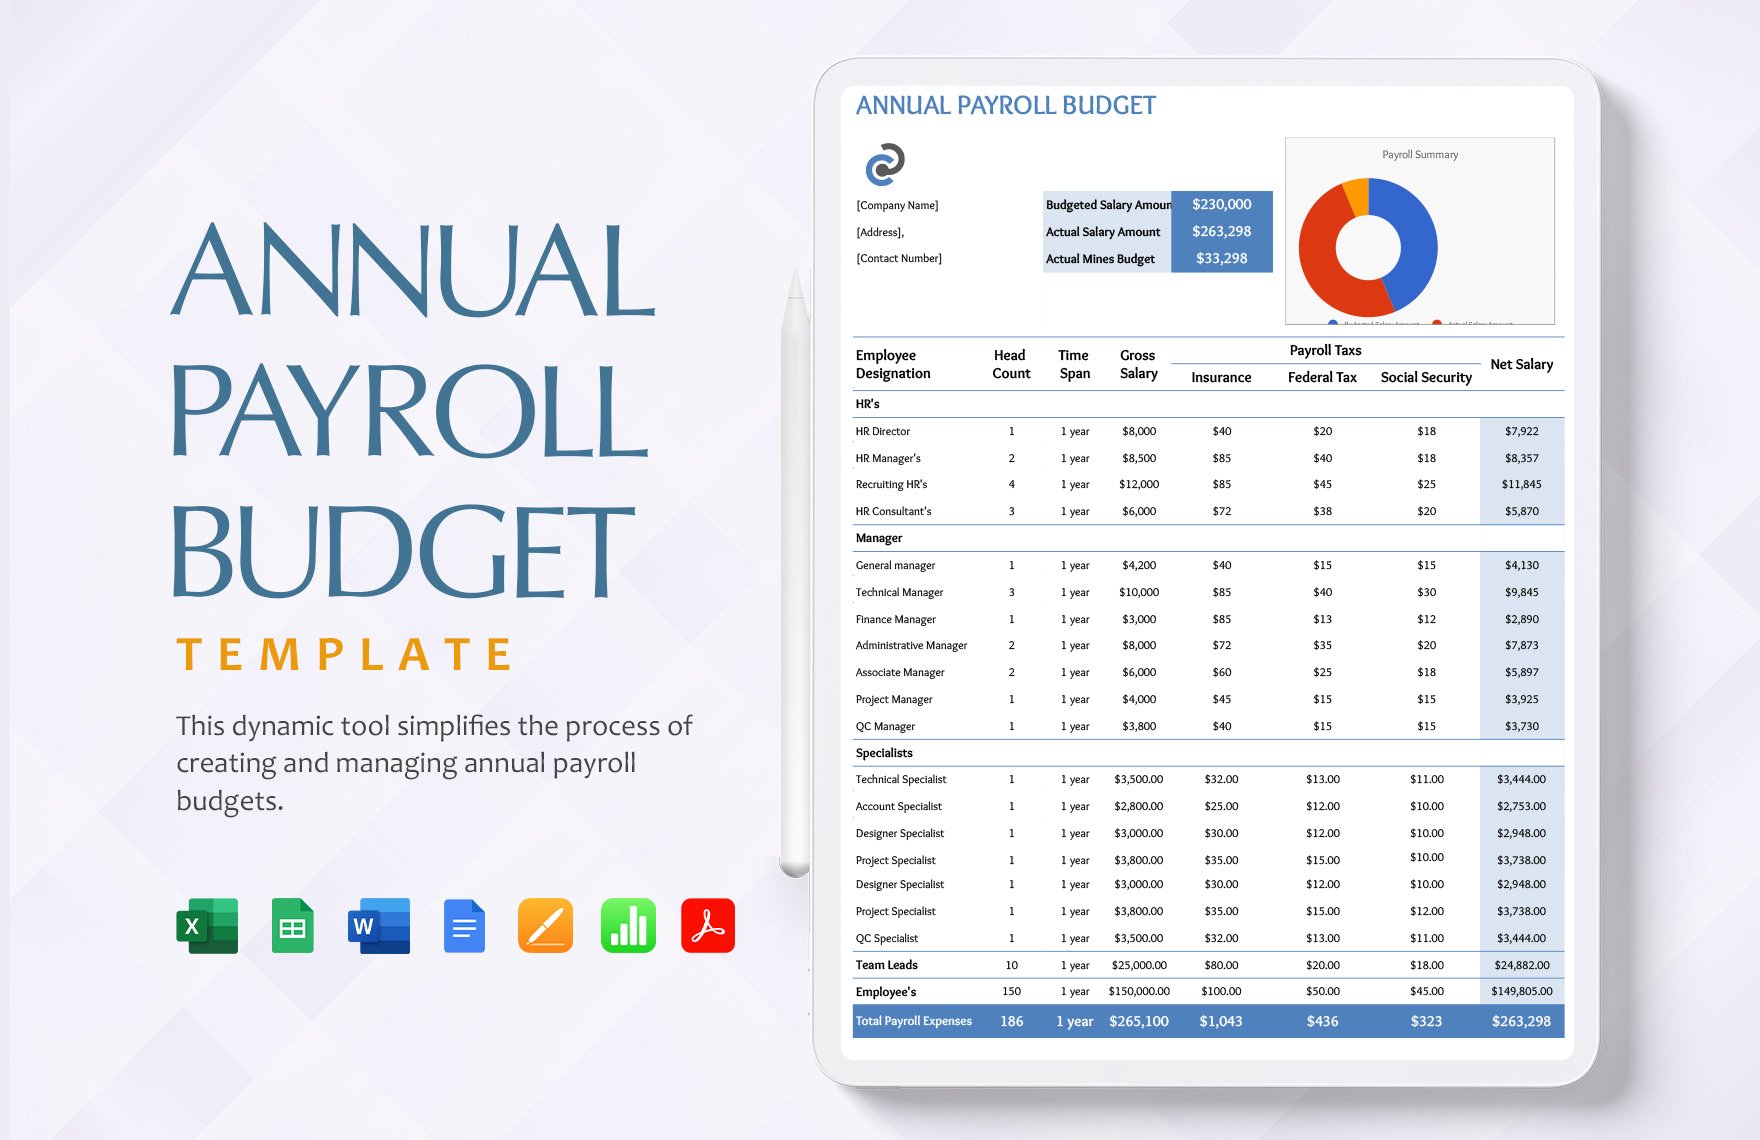 Annual Payroll Budget Template in Word, Google Docs, Excel, PDF, Google Sheets, Apple Pages, Apple Numbers